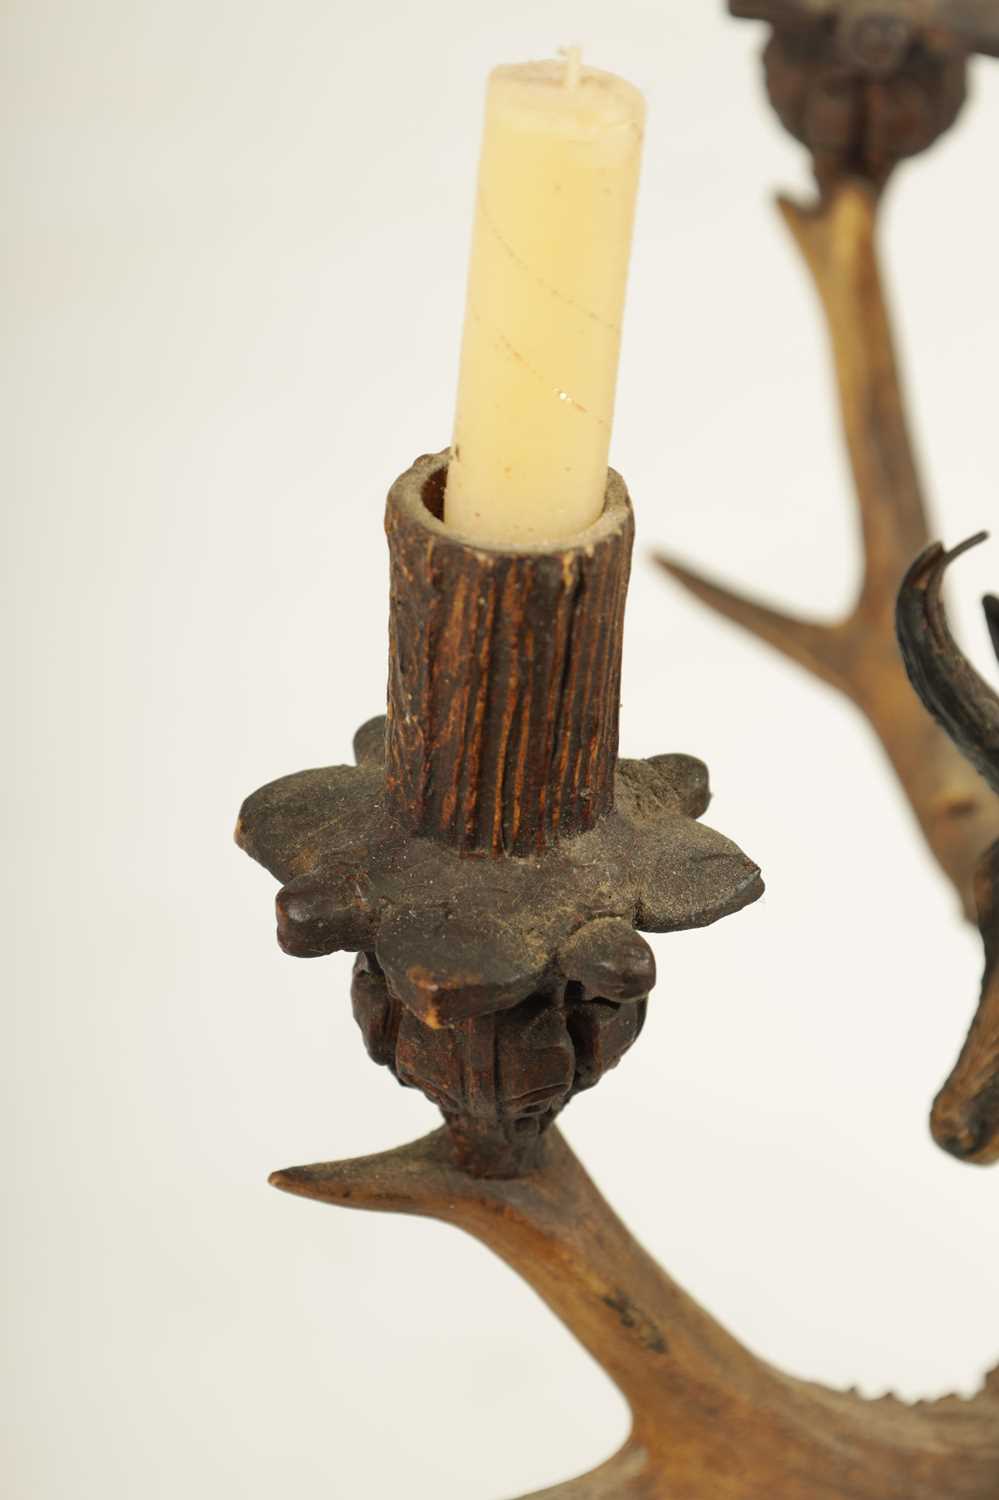 AN UNUSUAL PAIR OF 19TH CENTURY BLACK FOREST POLYCHROME CARVED WOOD, ANTLER HORN AND BOAR’S TUSK FIV - Image 4 of 8